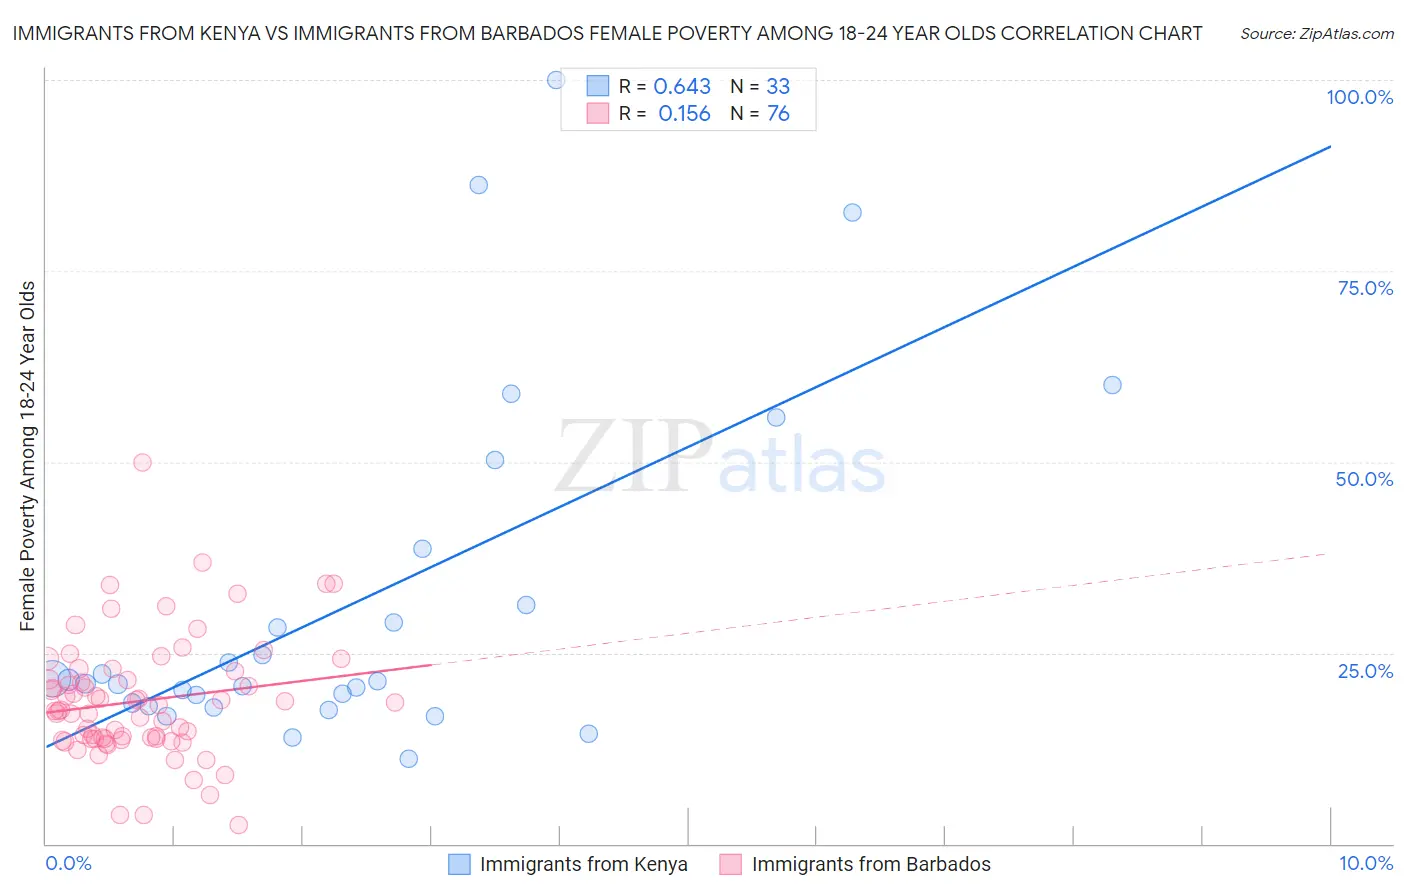 Immigrants from Kenya vs Immigrants from Barbados Female Poverty Among 18-24 Year Olds